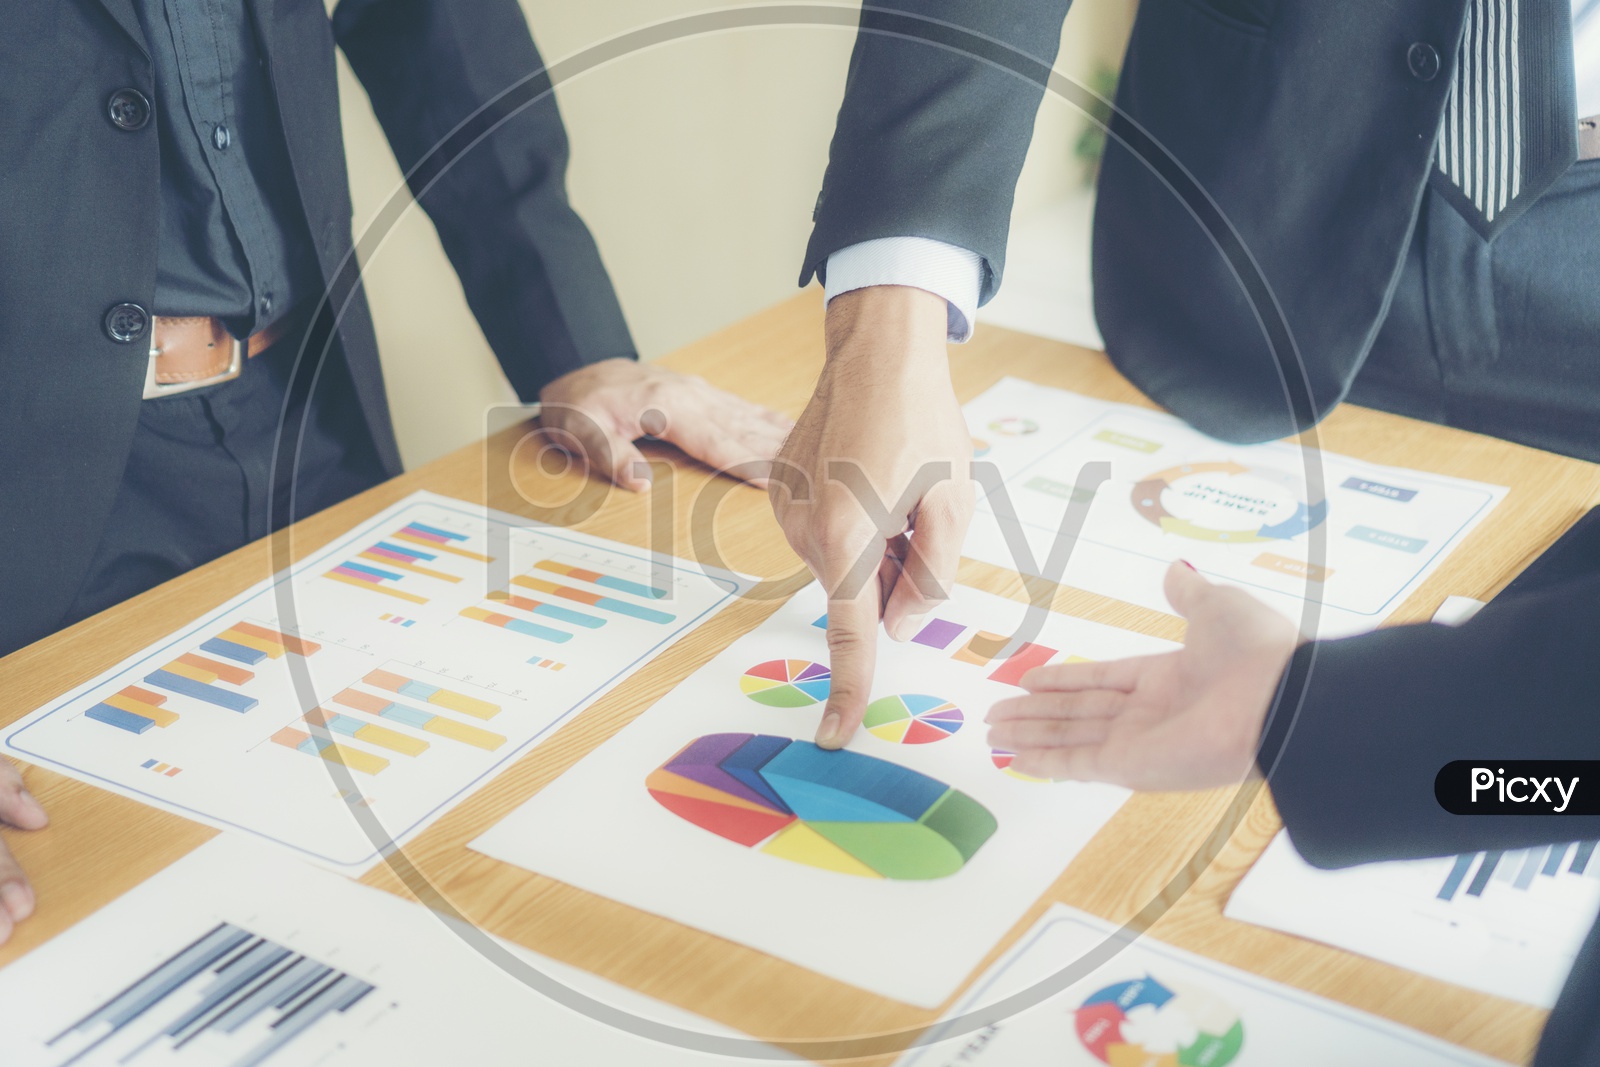 Business Entrepreneurs Discussing Business Plans With Growth Data With Charts And Figures on a Office Desk Closeup